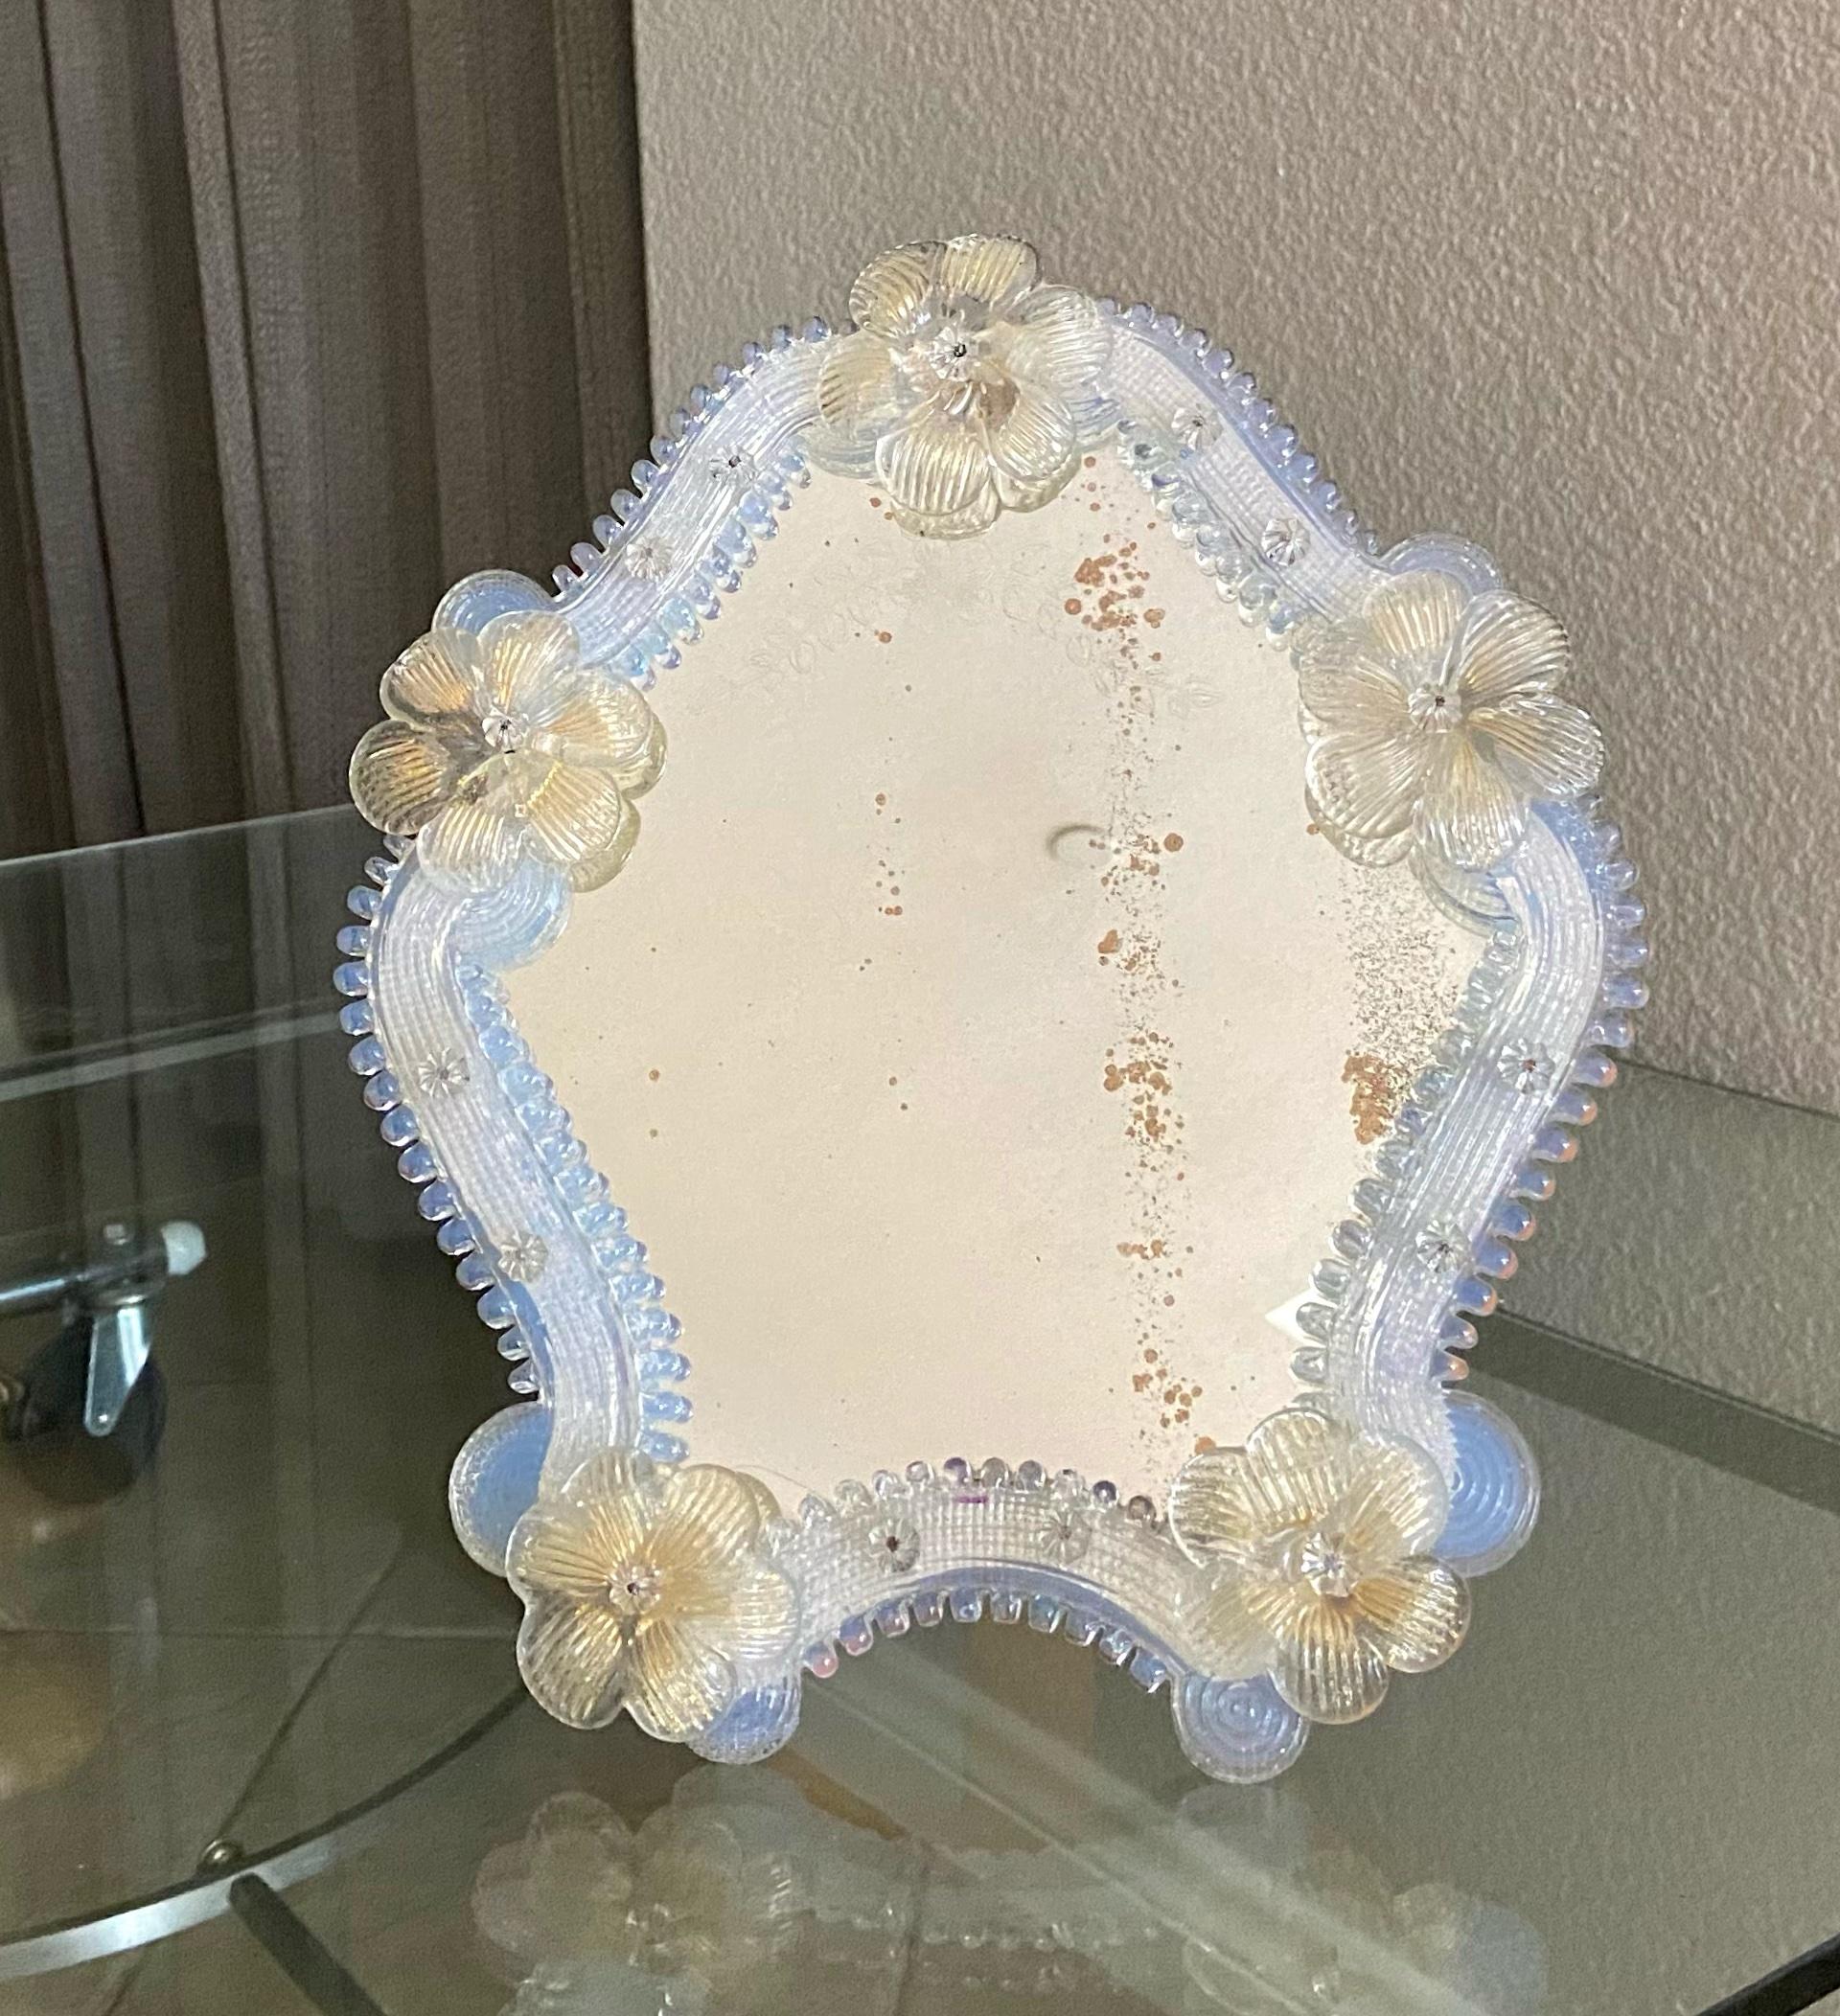 Murano vanity table mirror with clear and gold flowers, and opalescence color glass pieces surrounding the mirror. Mirror glass has decorative etching. The stand and backing are wood. 
 